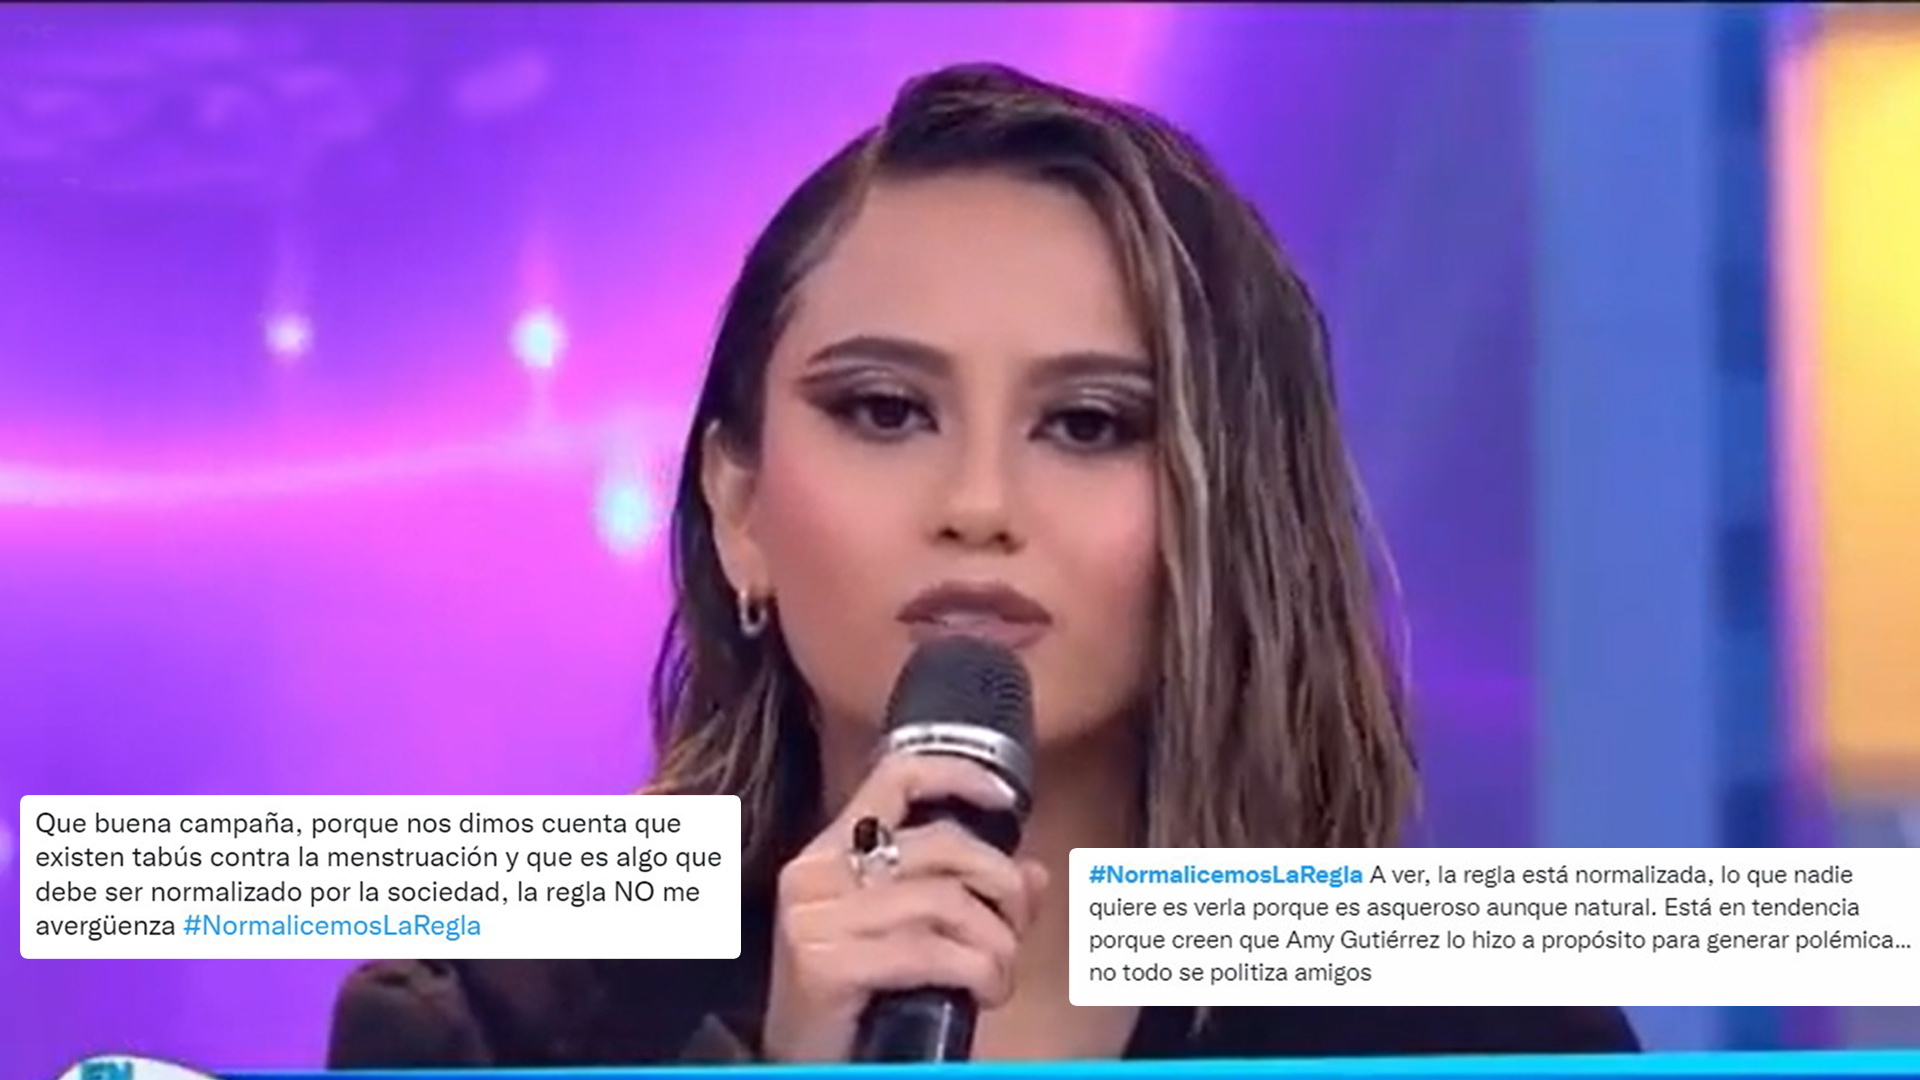 Users react to Amy Gutiérrez's explanation about her 